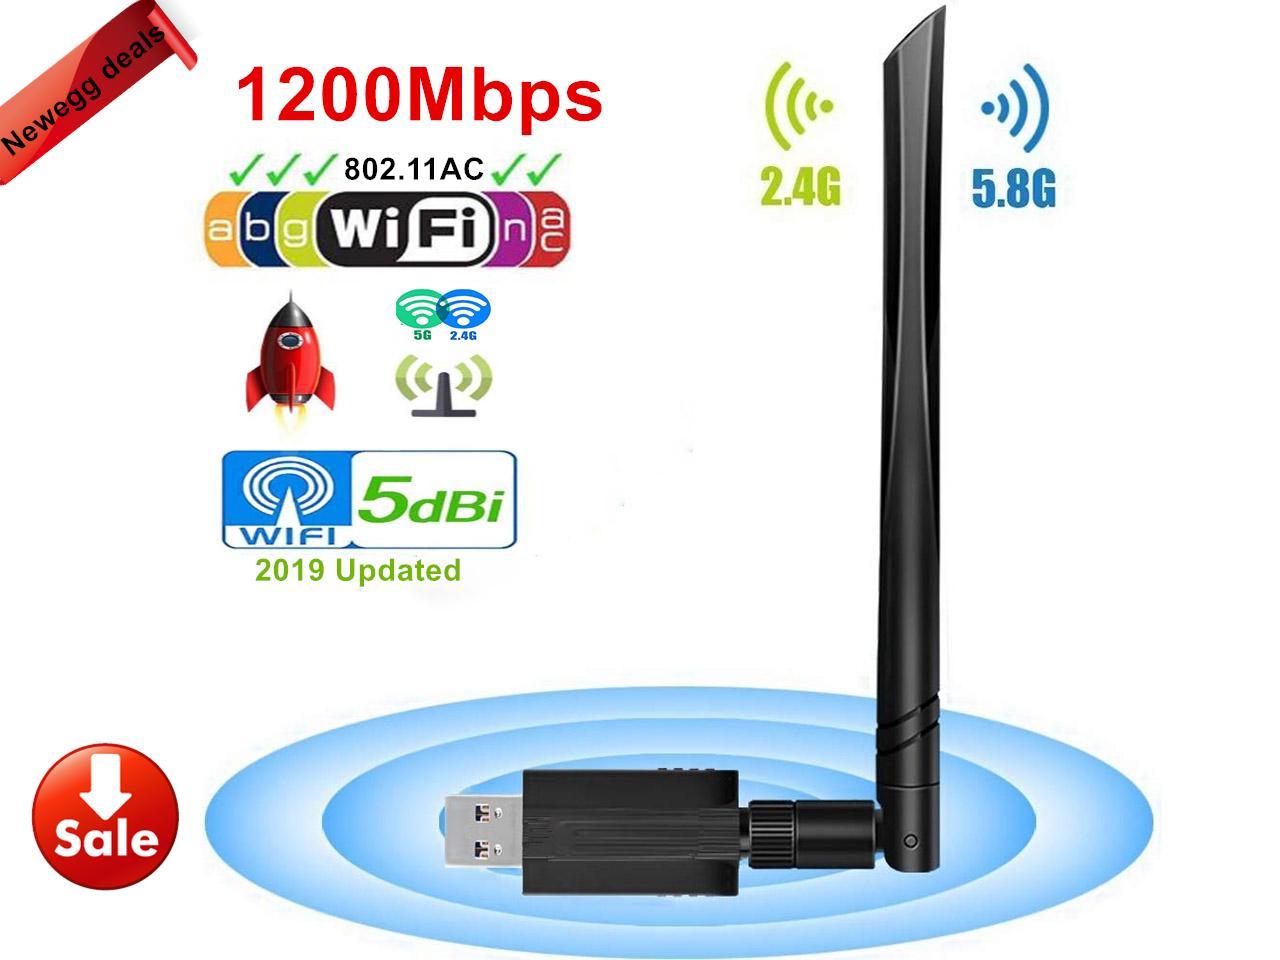 USB WiFi 600Mbps Dual Band 2.4G/5G Mini Wi-fi ac Wireless Network Card Dongle with High Gain Antenna for Desktop Laptop PC Support Windows XP Vista/7/8/8.1/10 Blueshadow USB WiFi Adapter 